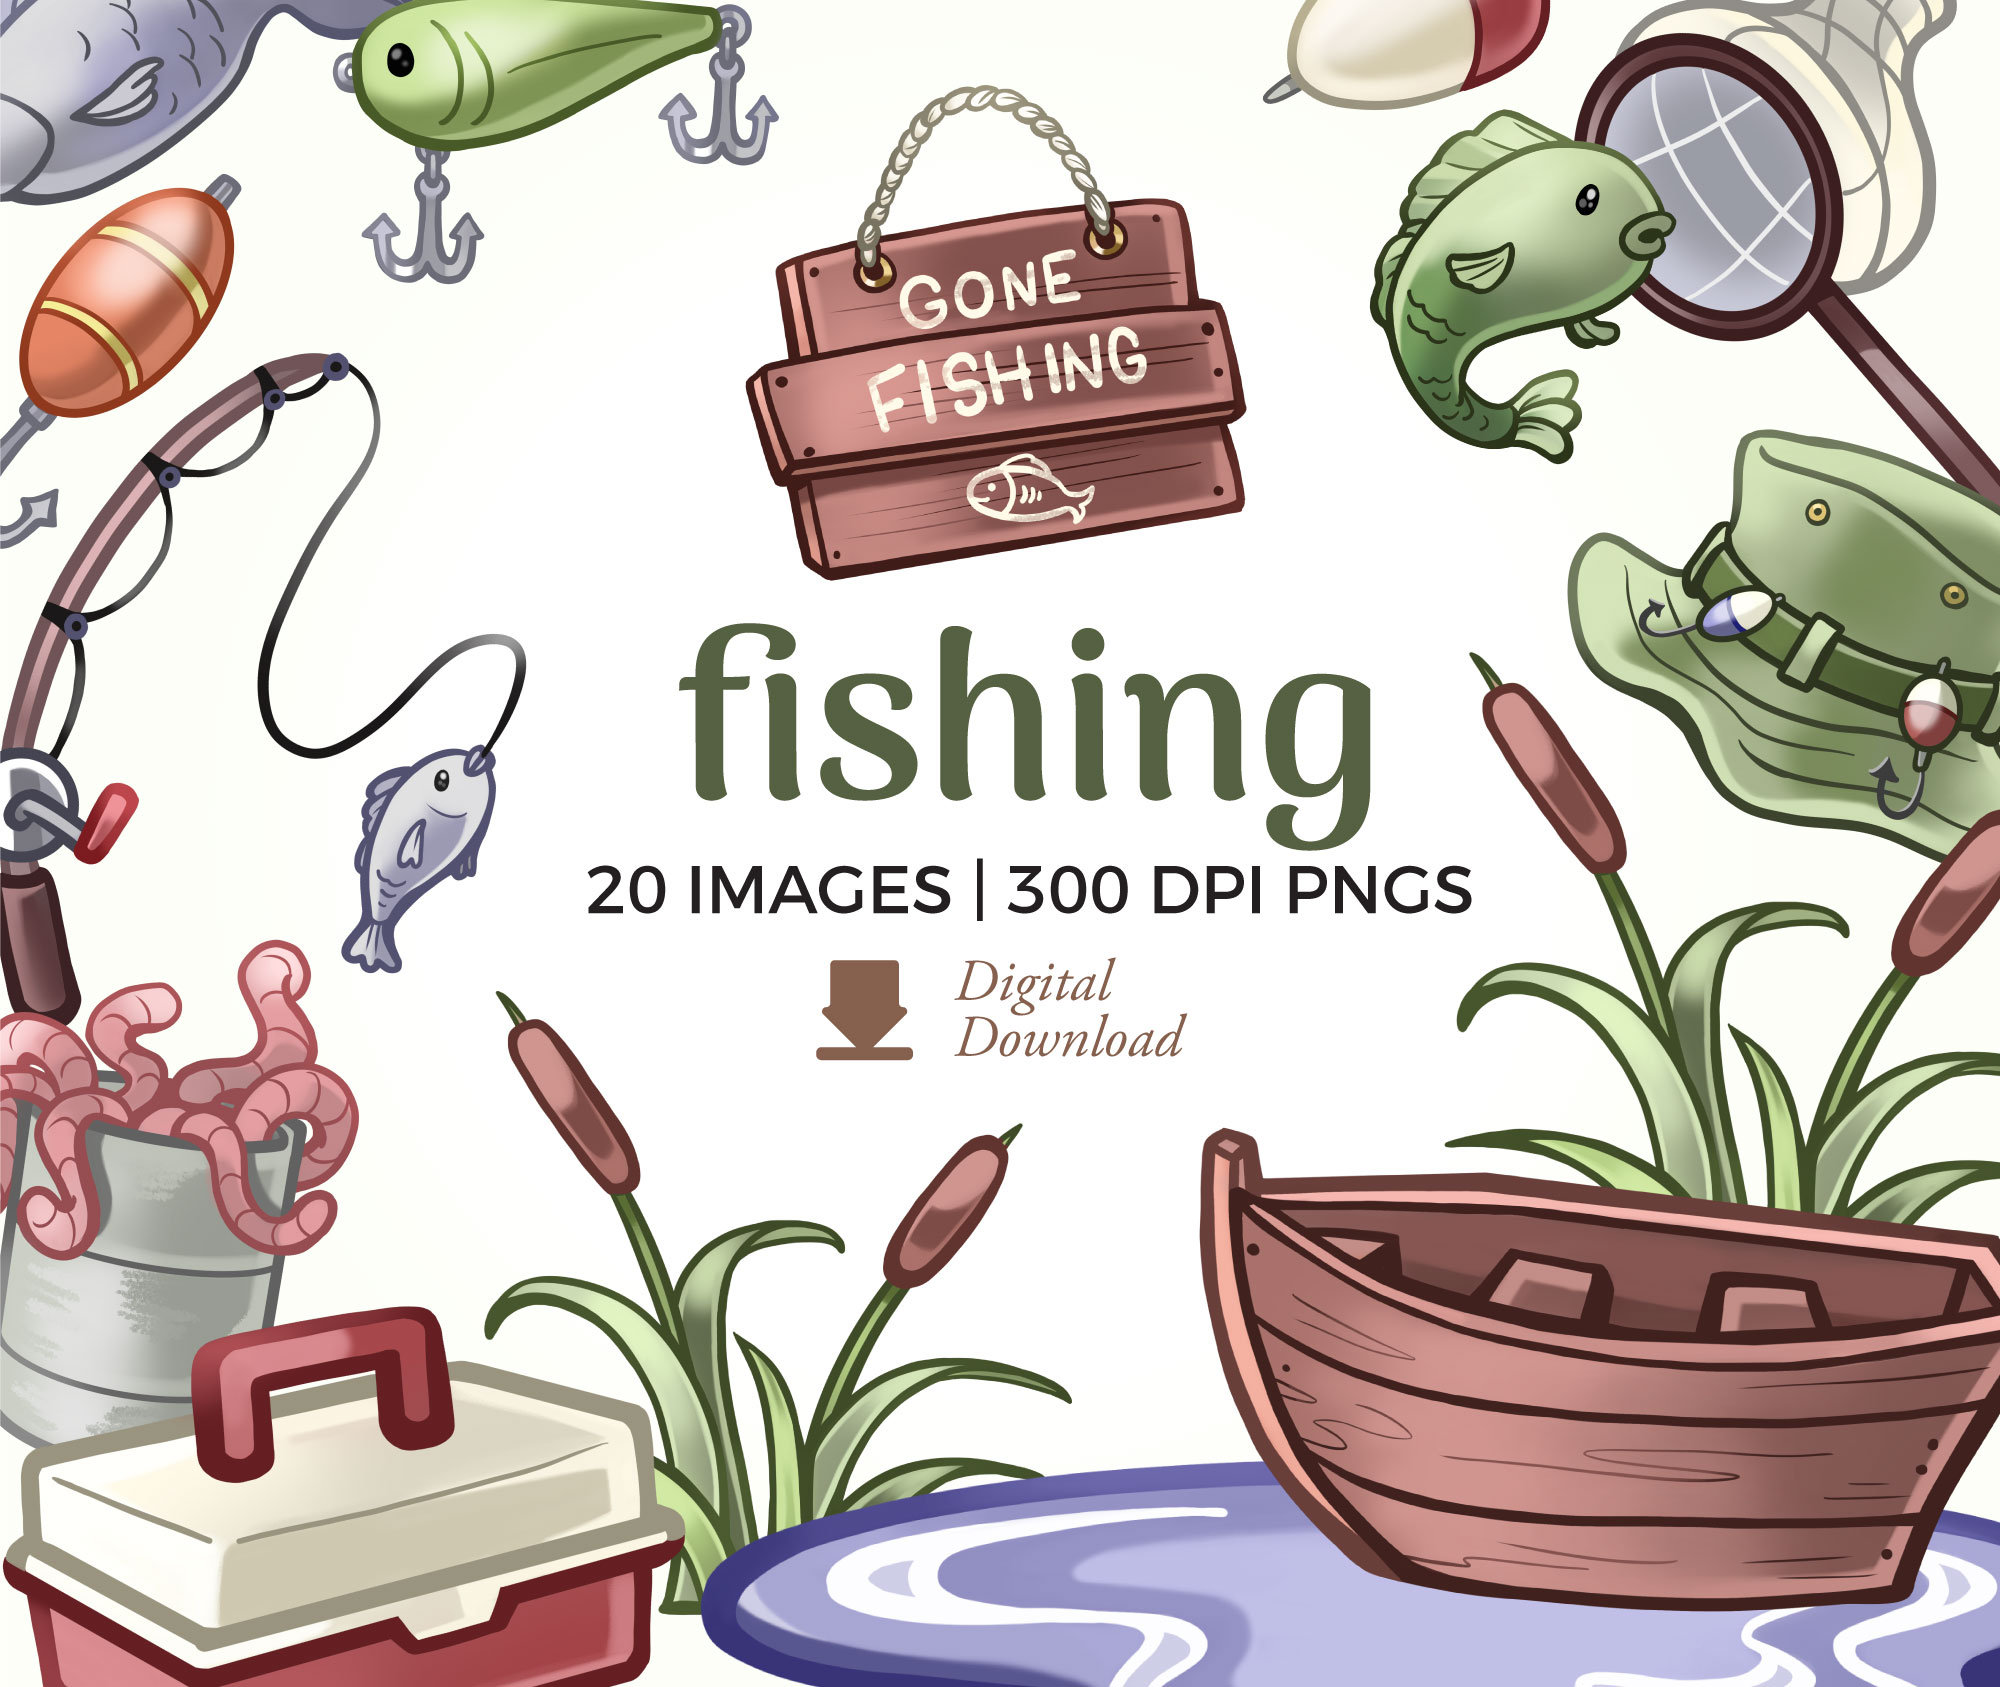 Fishing Clipart Illustrations Gone Fishing Clip Art Download Bait and  Tackle Box Graphics, Fishing Rods Image Files, Commercial Use Pngs 